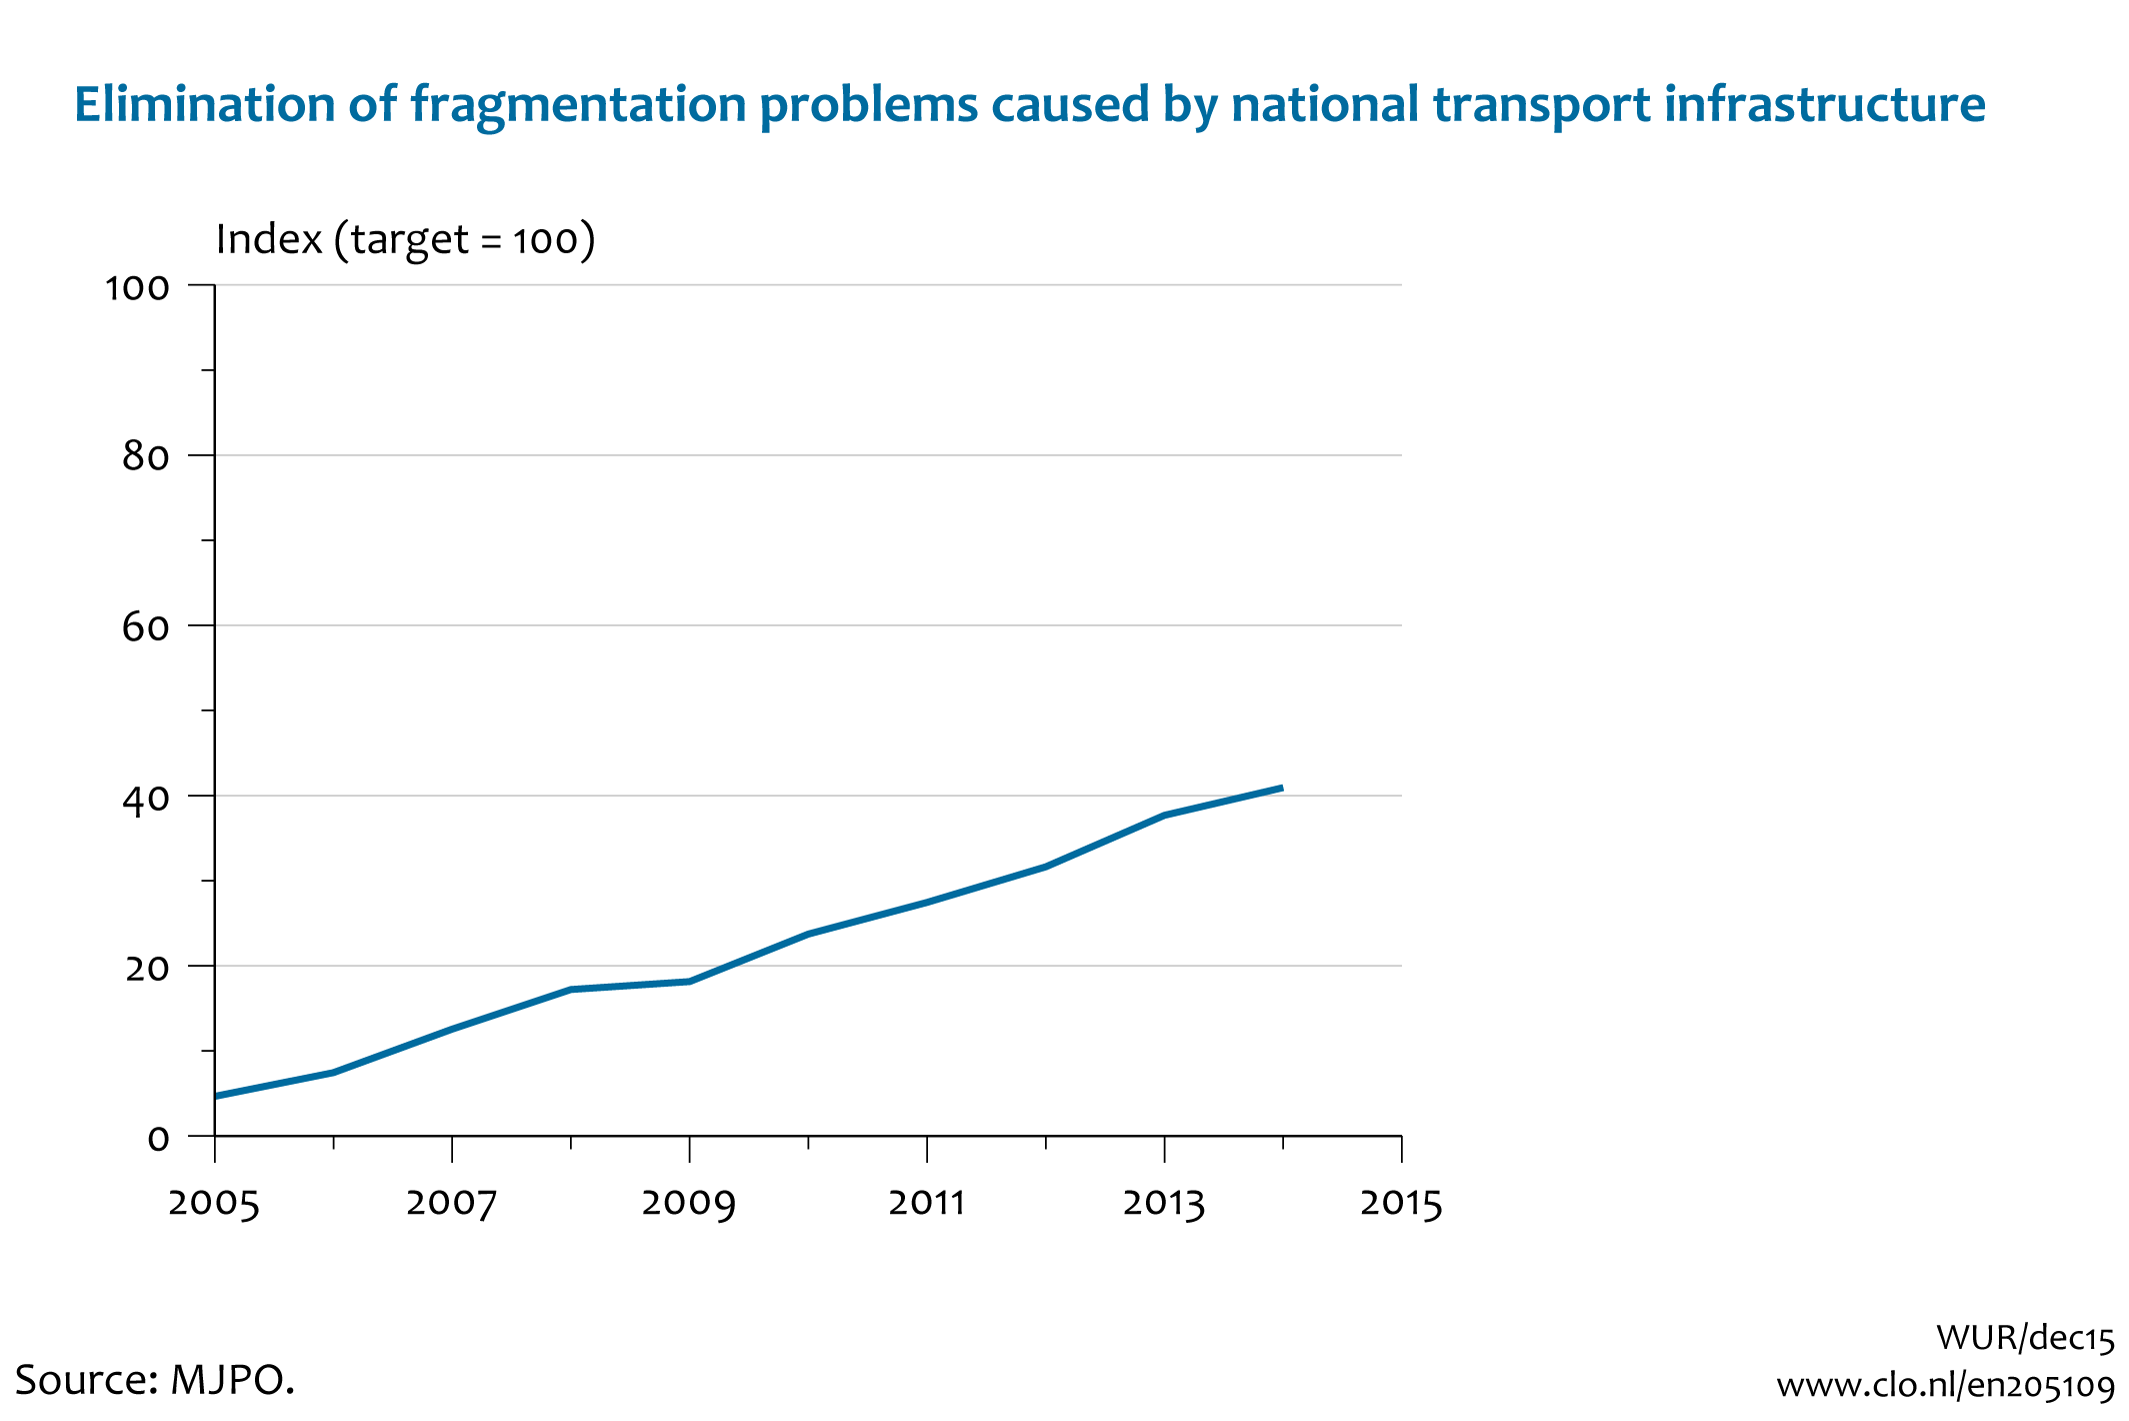 Image Elimination of fragmentation problems caused by national infrastructure . The image is further explained in the text.